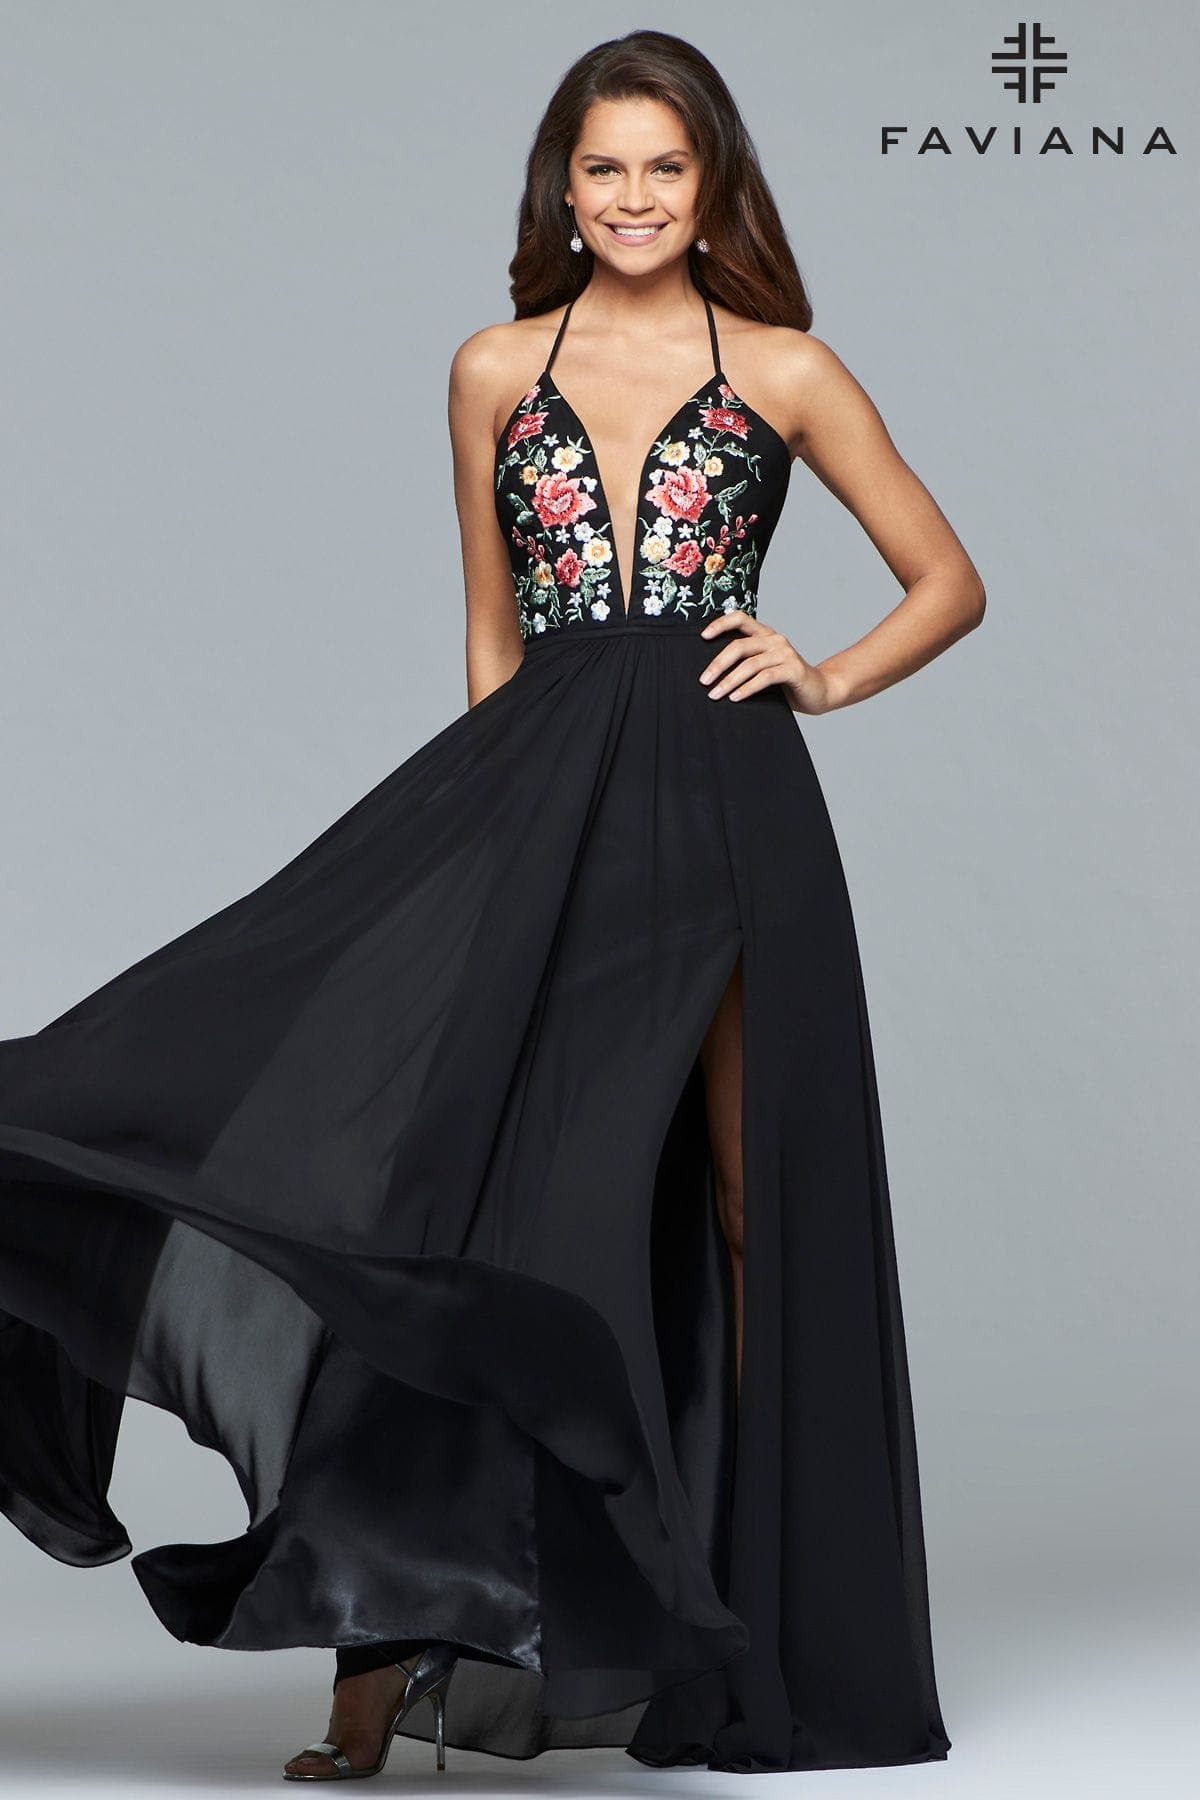 V Neck Long Chiffon Dress With Floral Embroidered Bodice